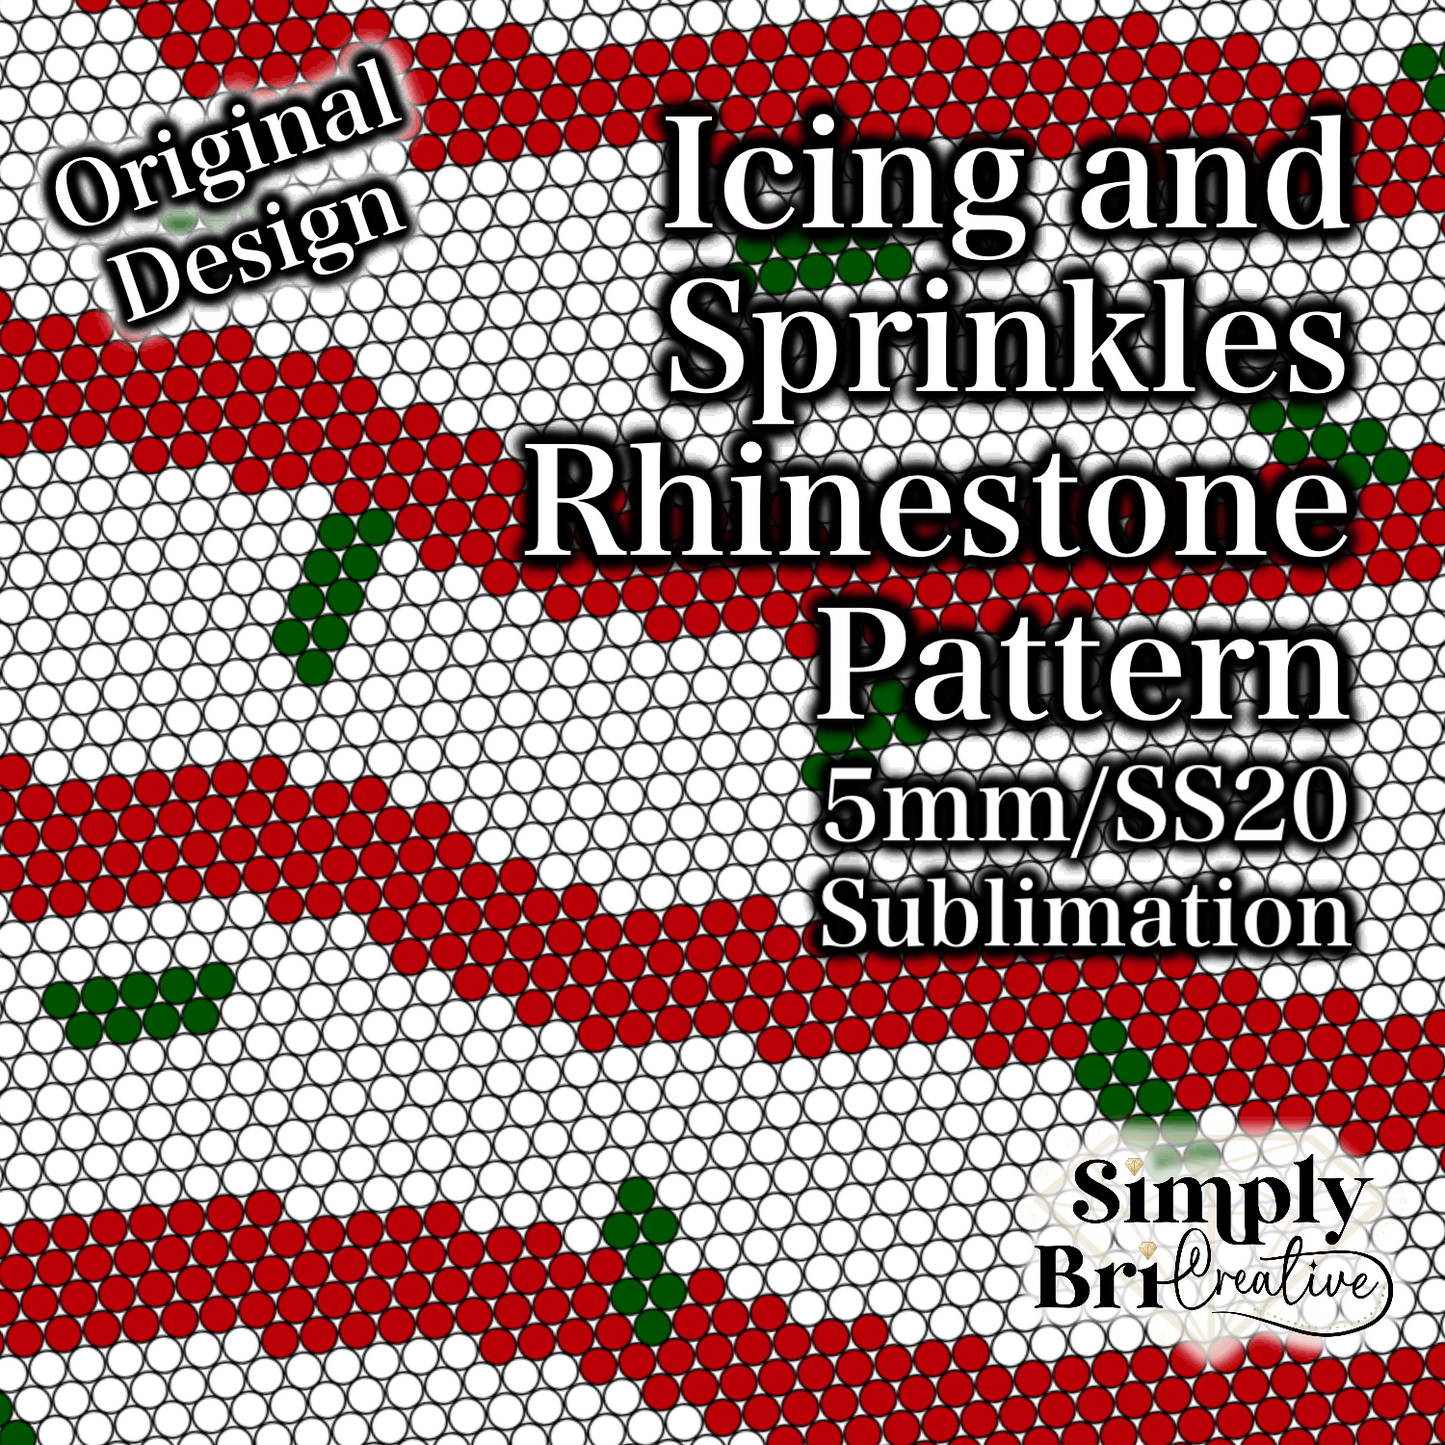 Icing and Sprinkles Sublimation Rhinestone Pattern (5MM/SS20)